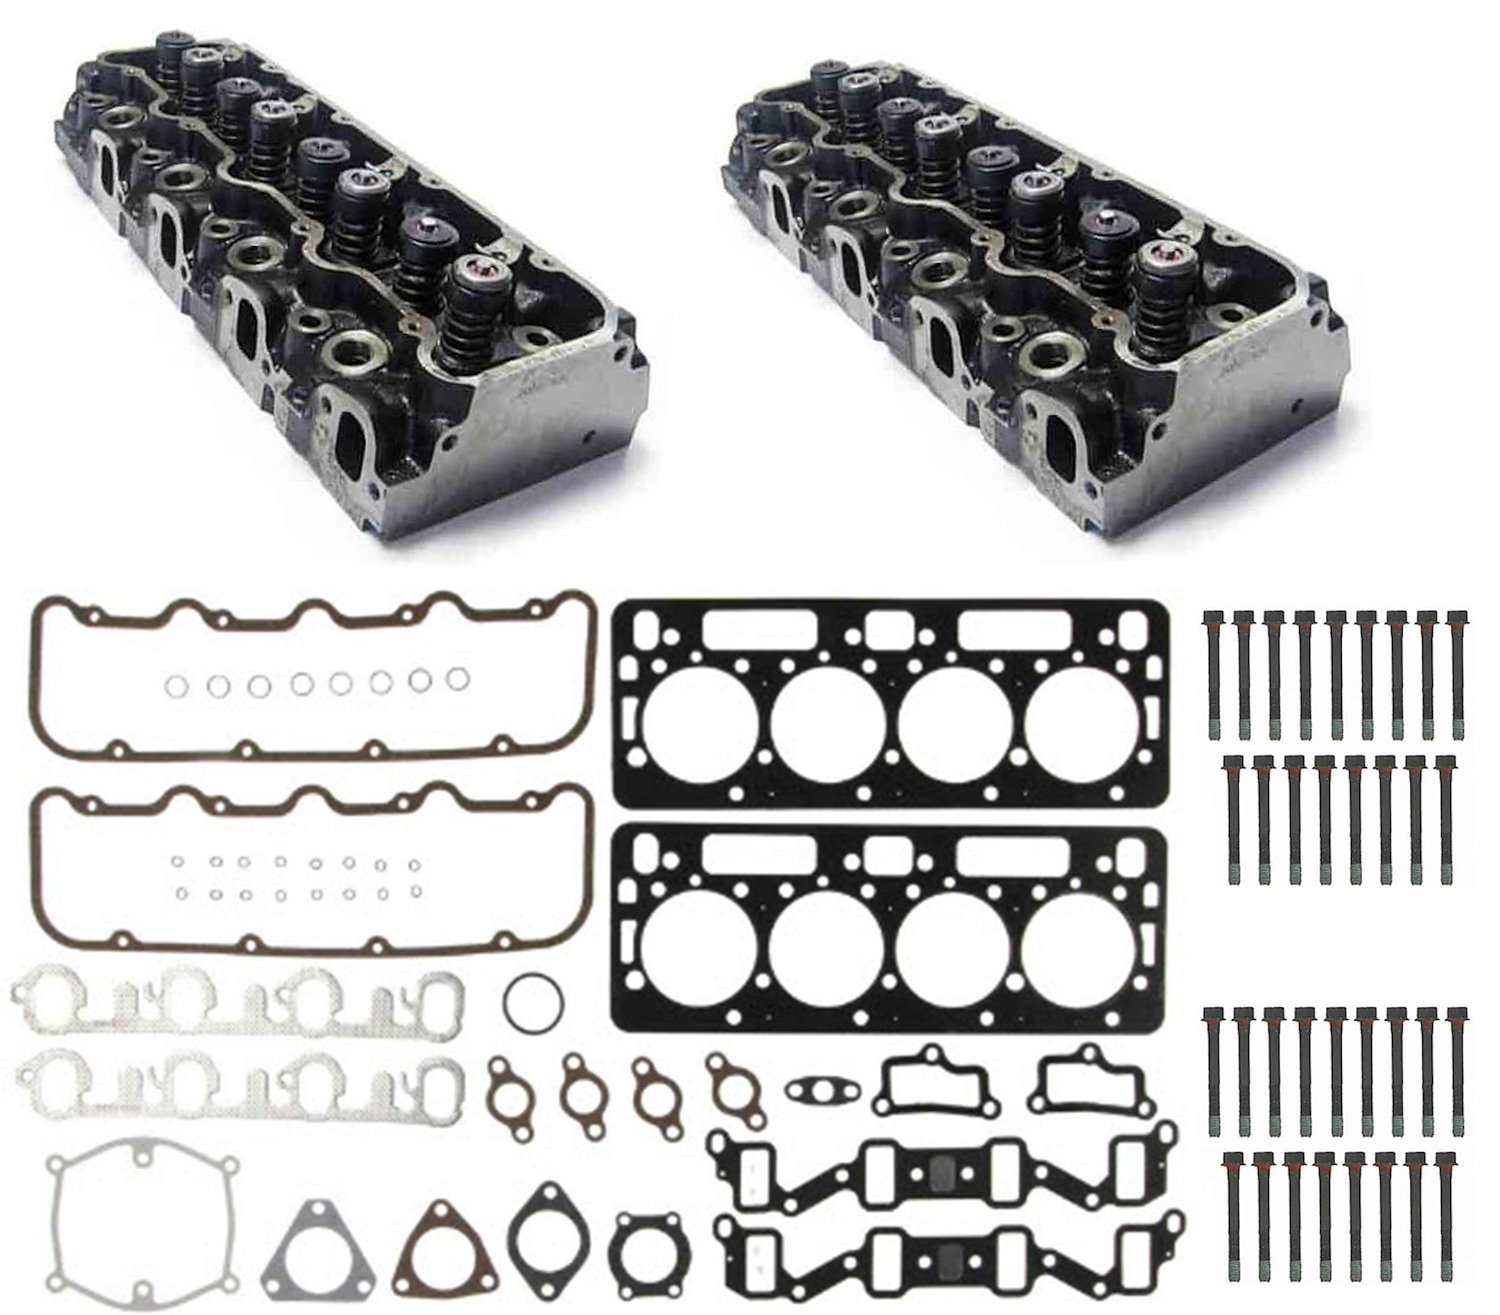 CHE855N Cylinder Head Kit for 1992-2000 GM 6.5L